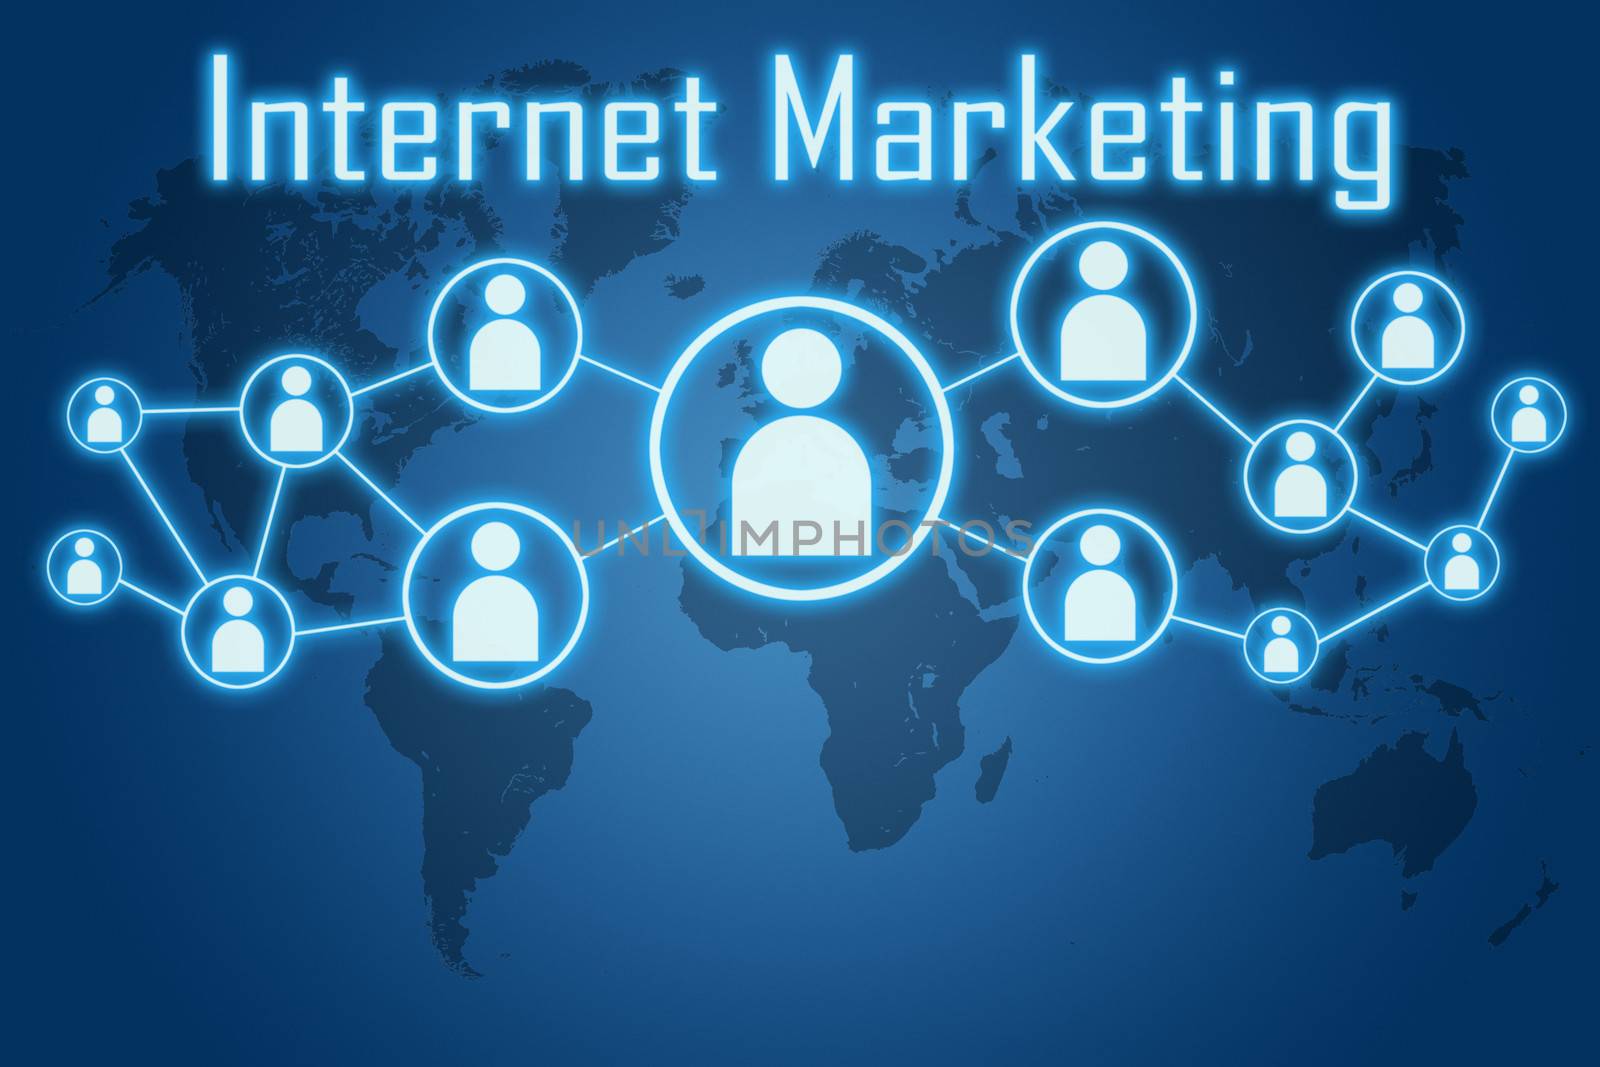 internet marketing concept on blue background with world map